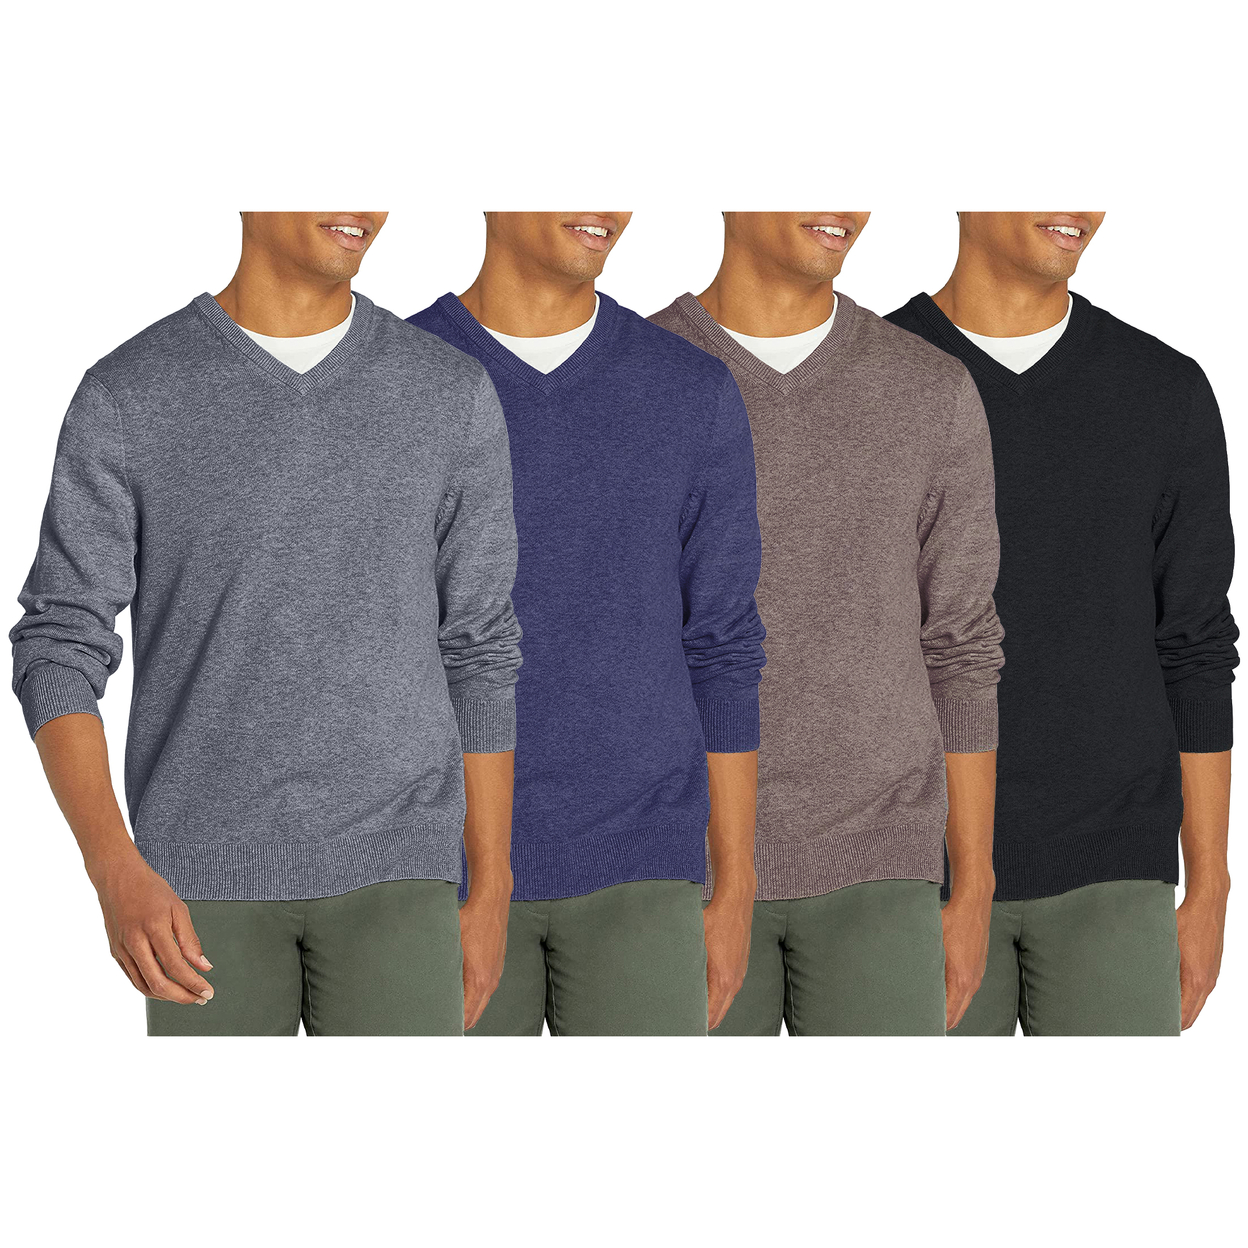 3-Pack: Men's Casual Ultra Soft Slim Fit Warm Knit V-Neck Sweater - Small